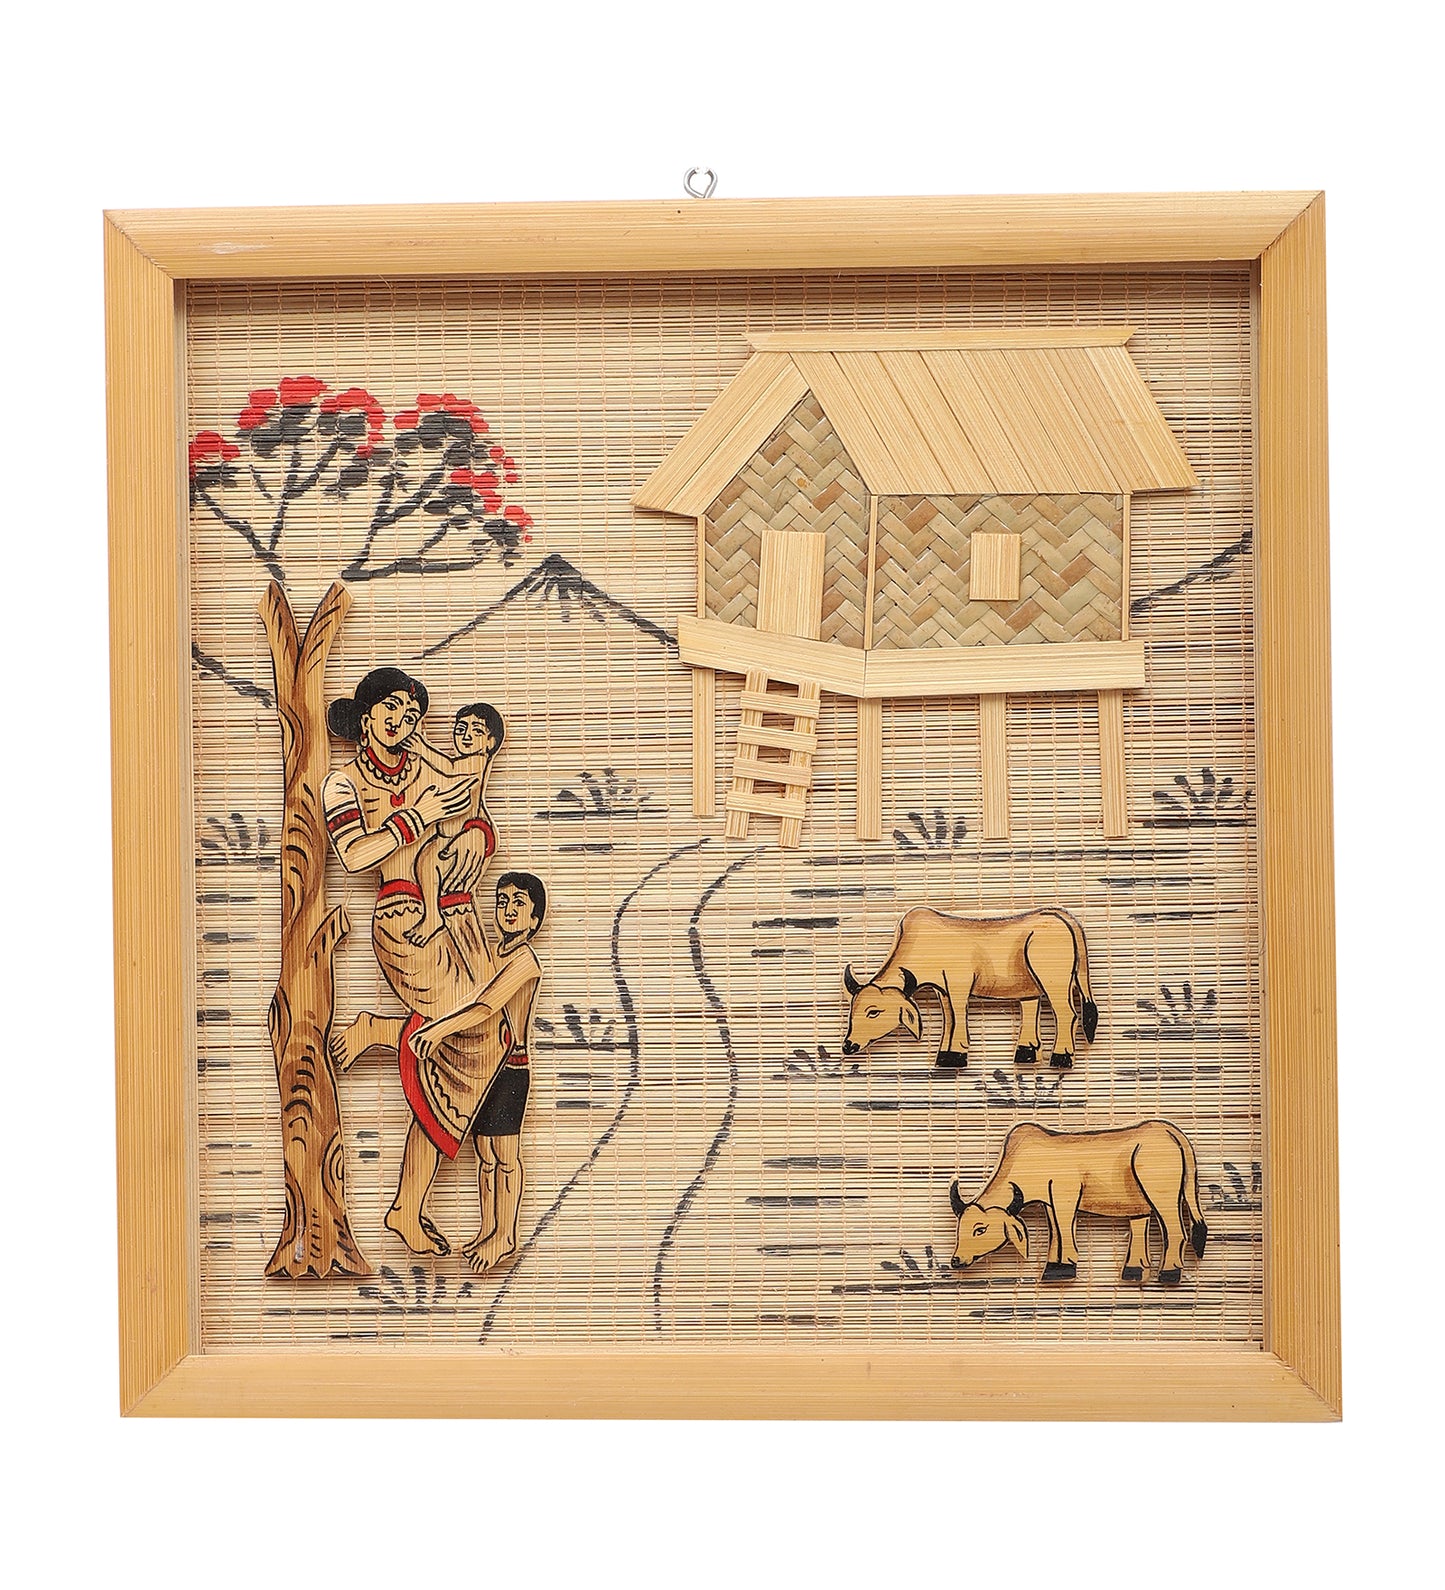 Bamboo Wall Hanging - Small (30 x 30 cm)